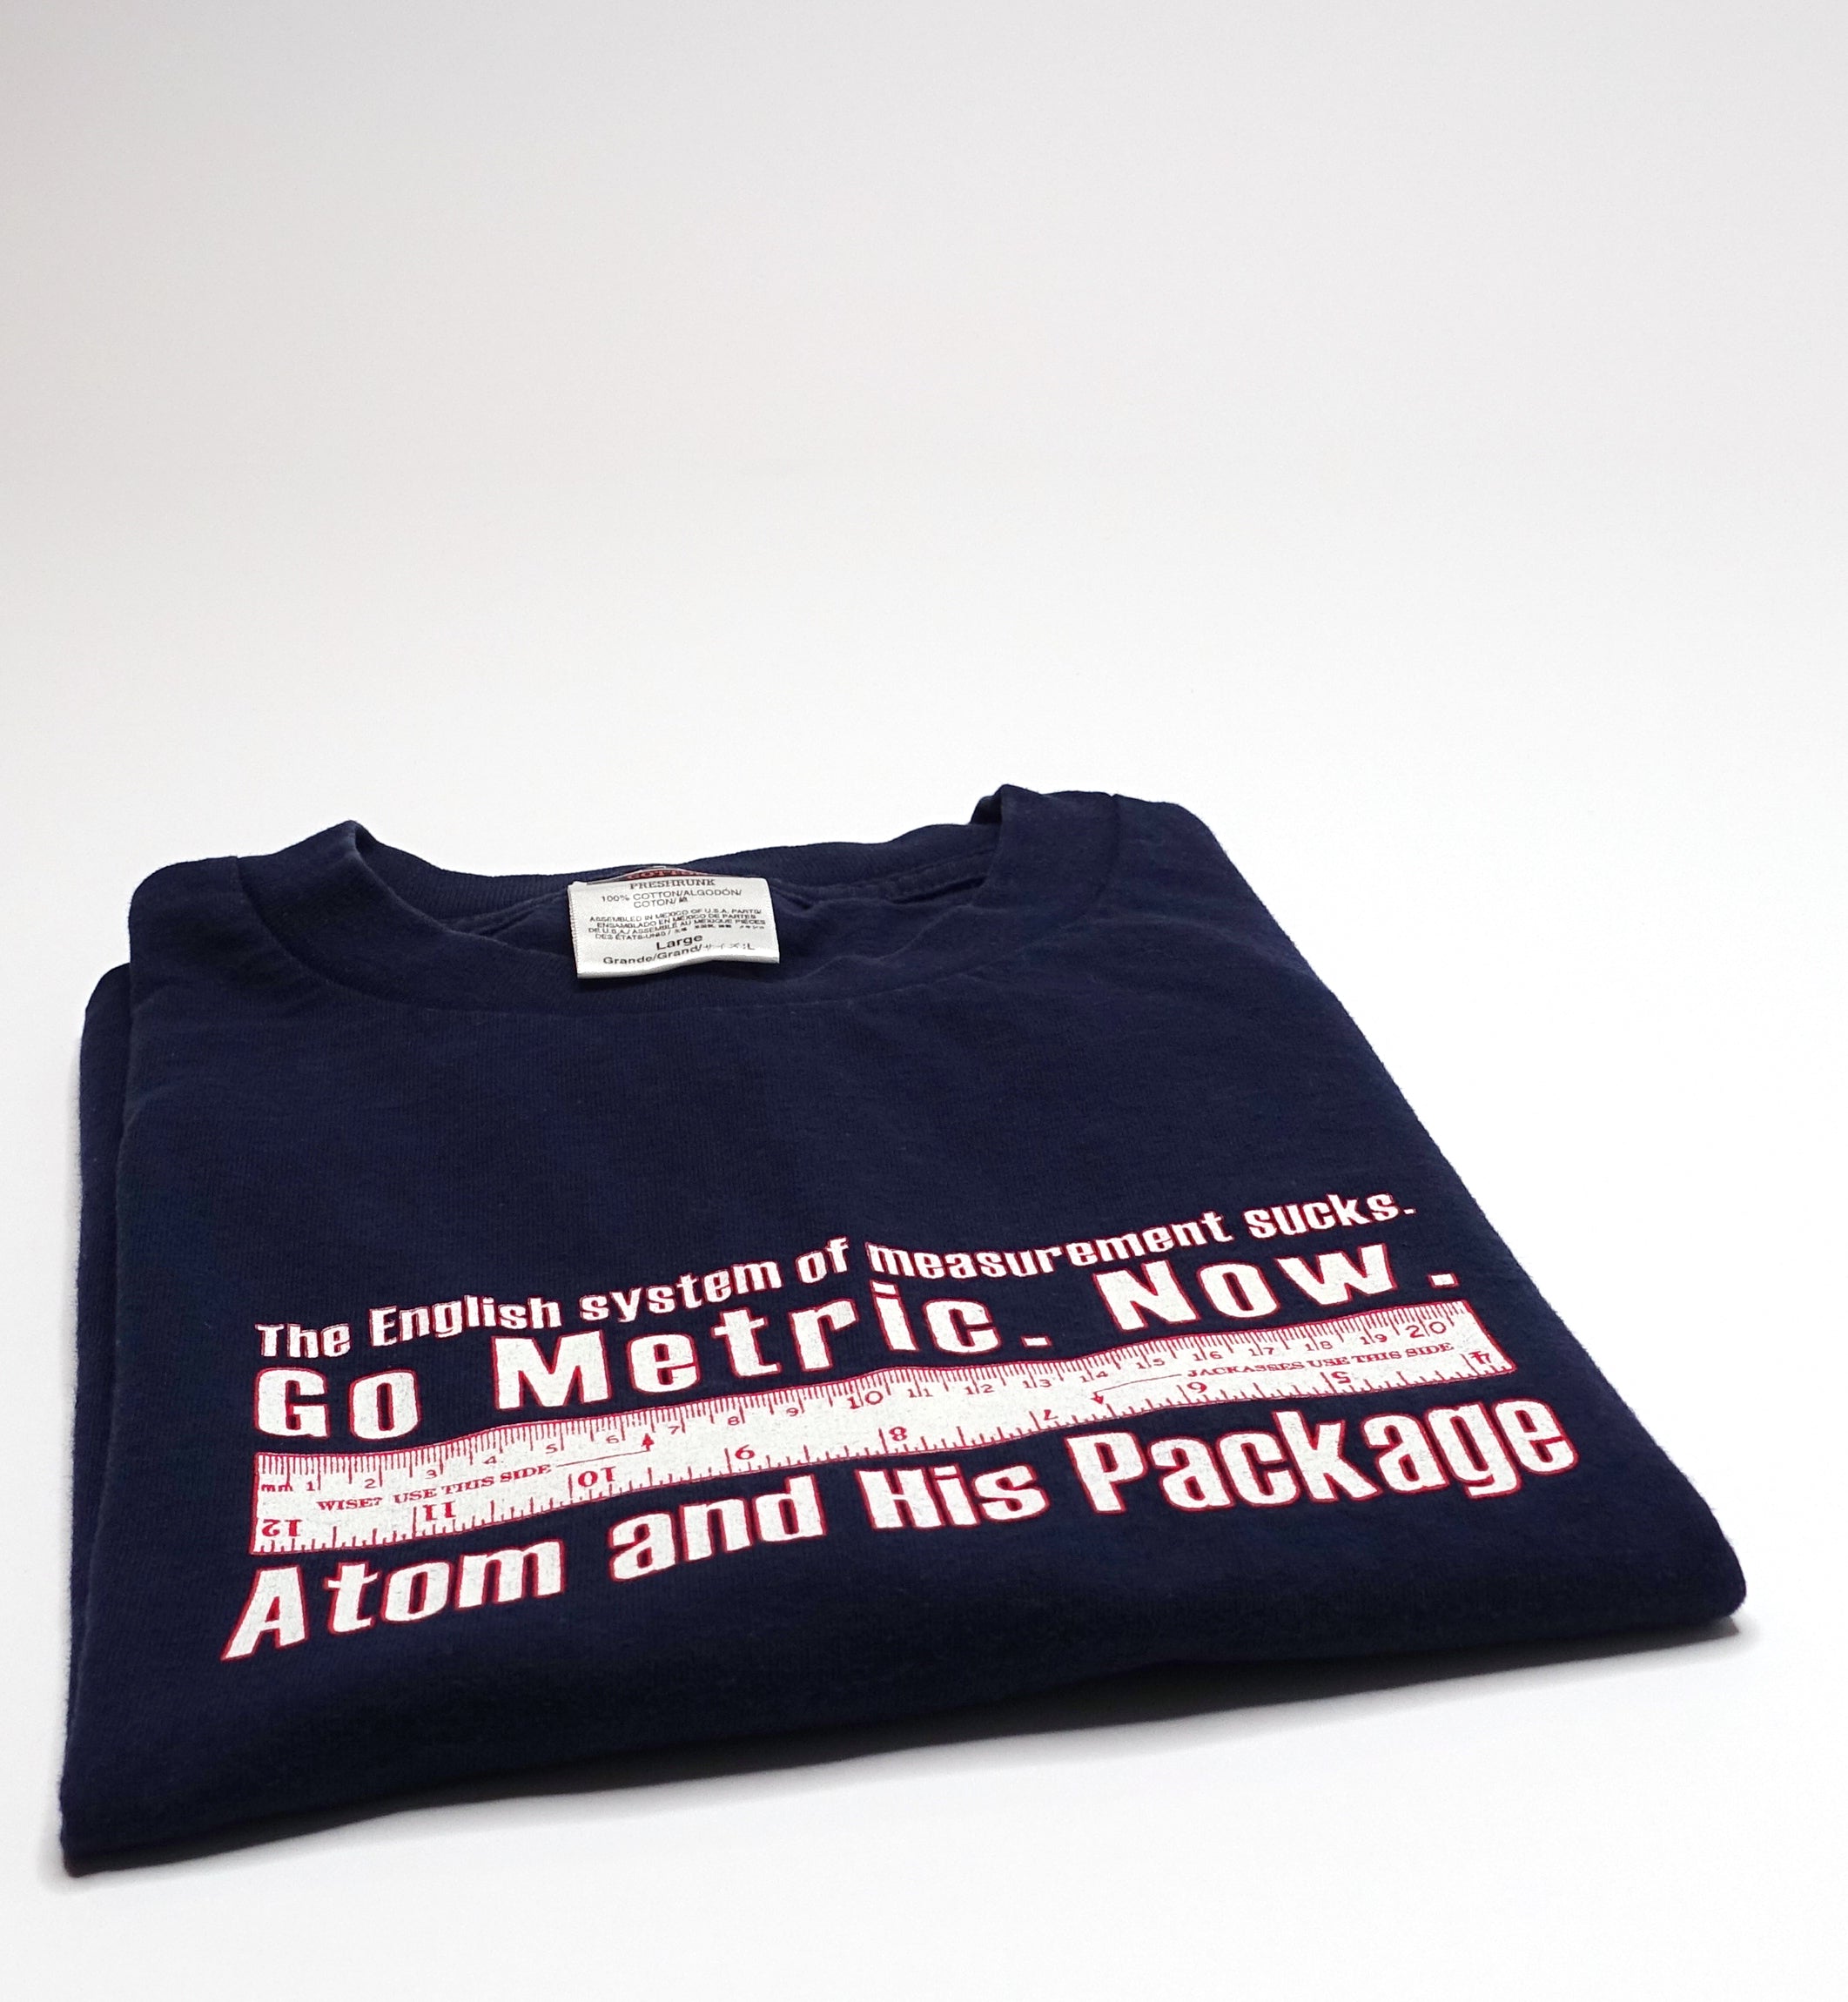 Atom And His Package ‎– Go Metric Now! 2001 Tour Shirt Size Large